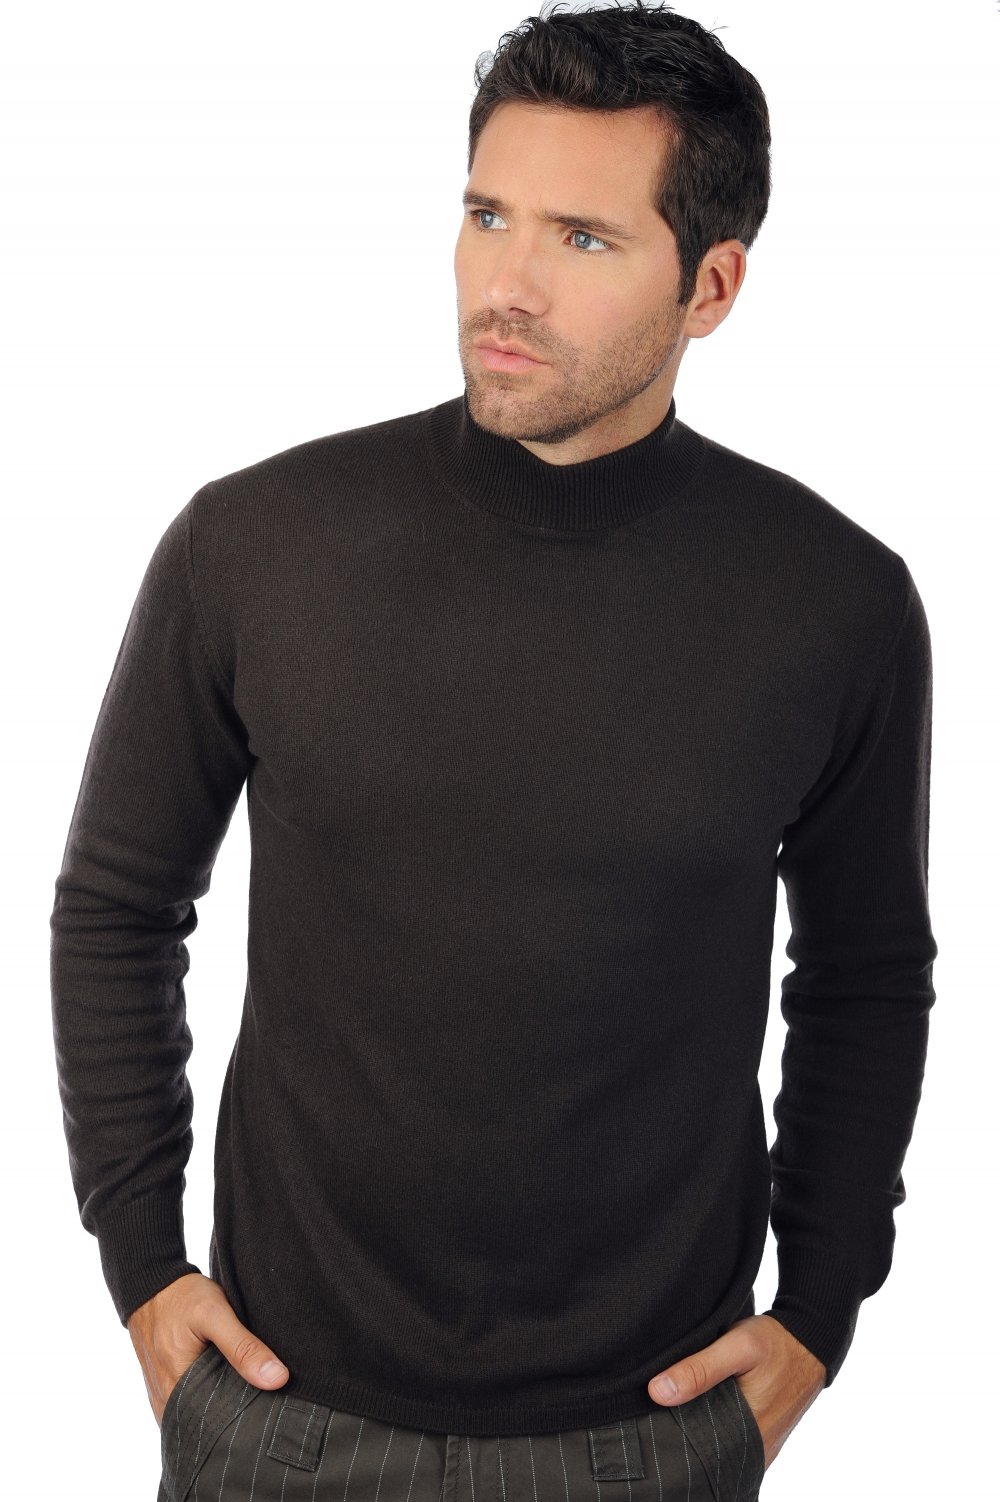 Cachemire pull homme frederic capuccino 3xl